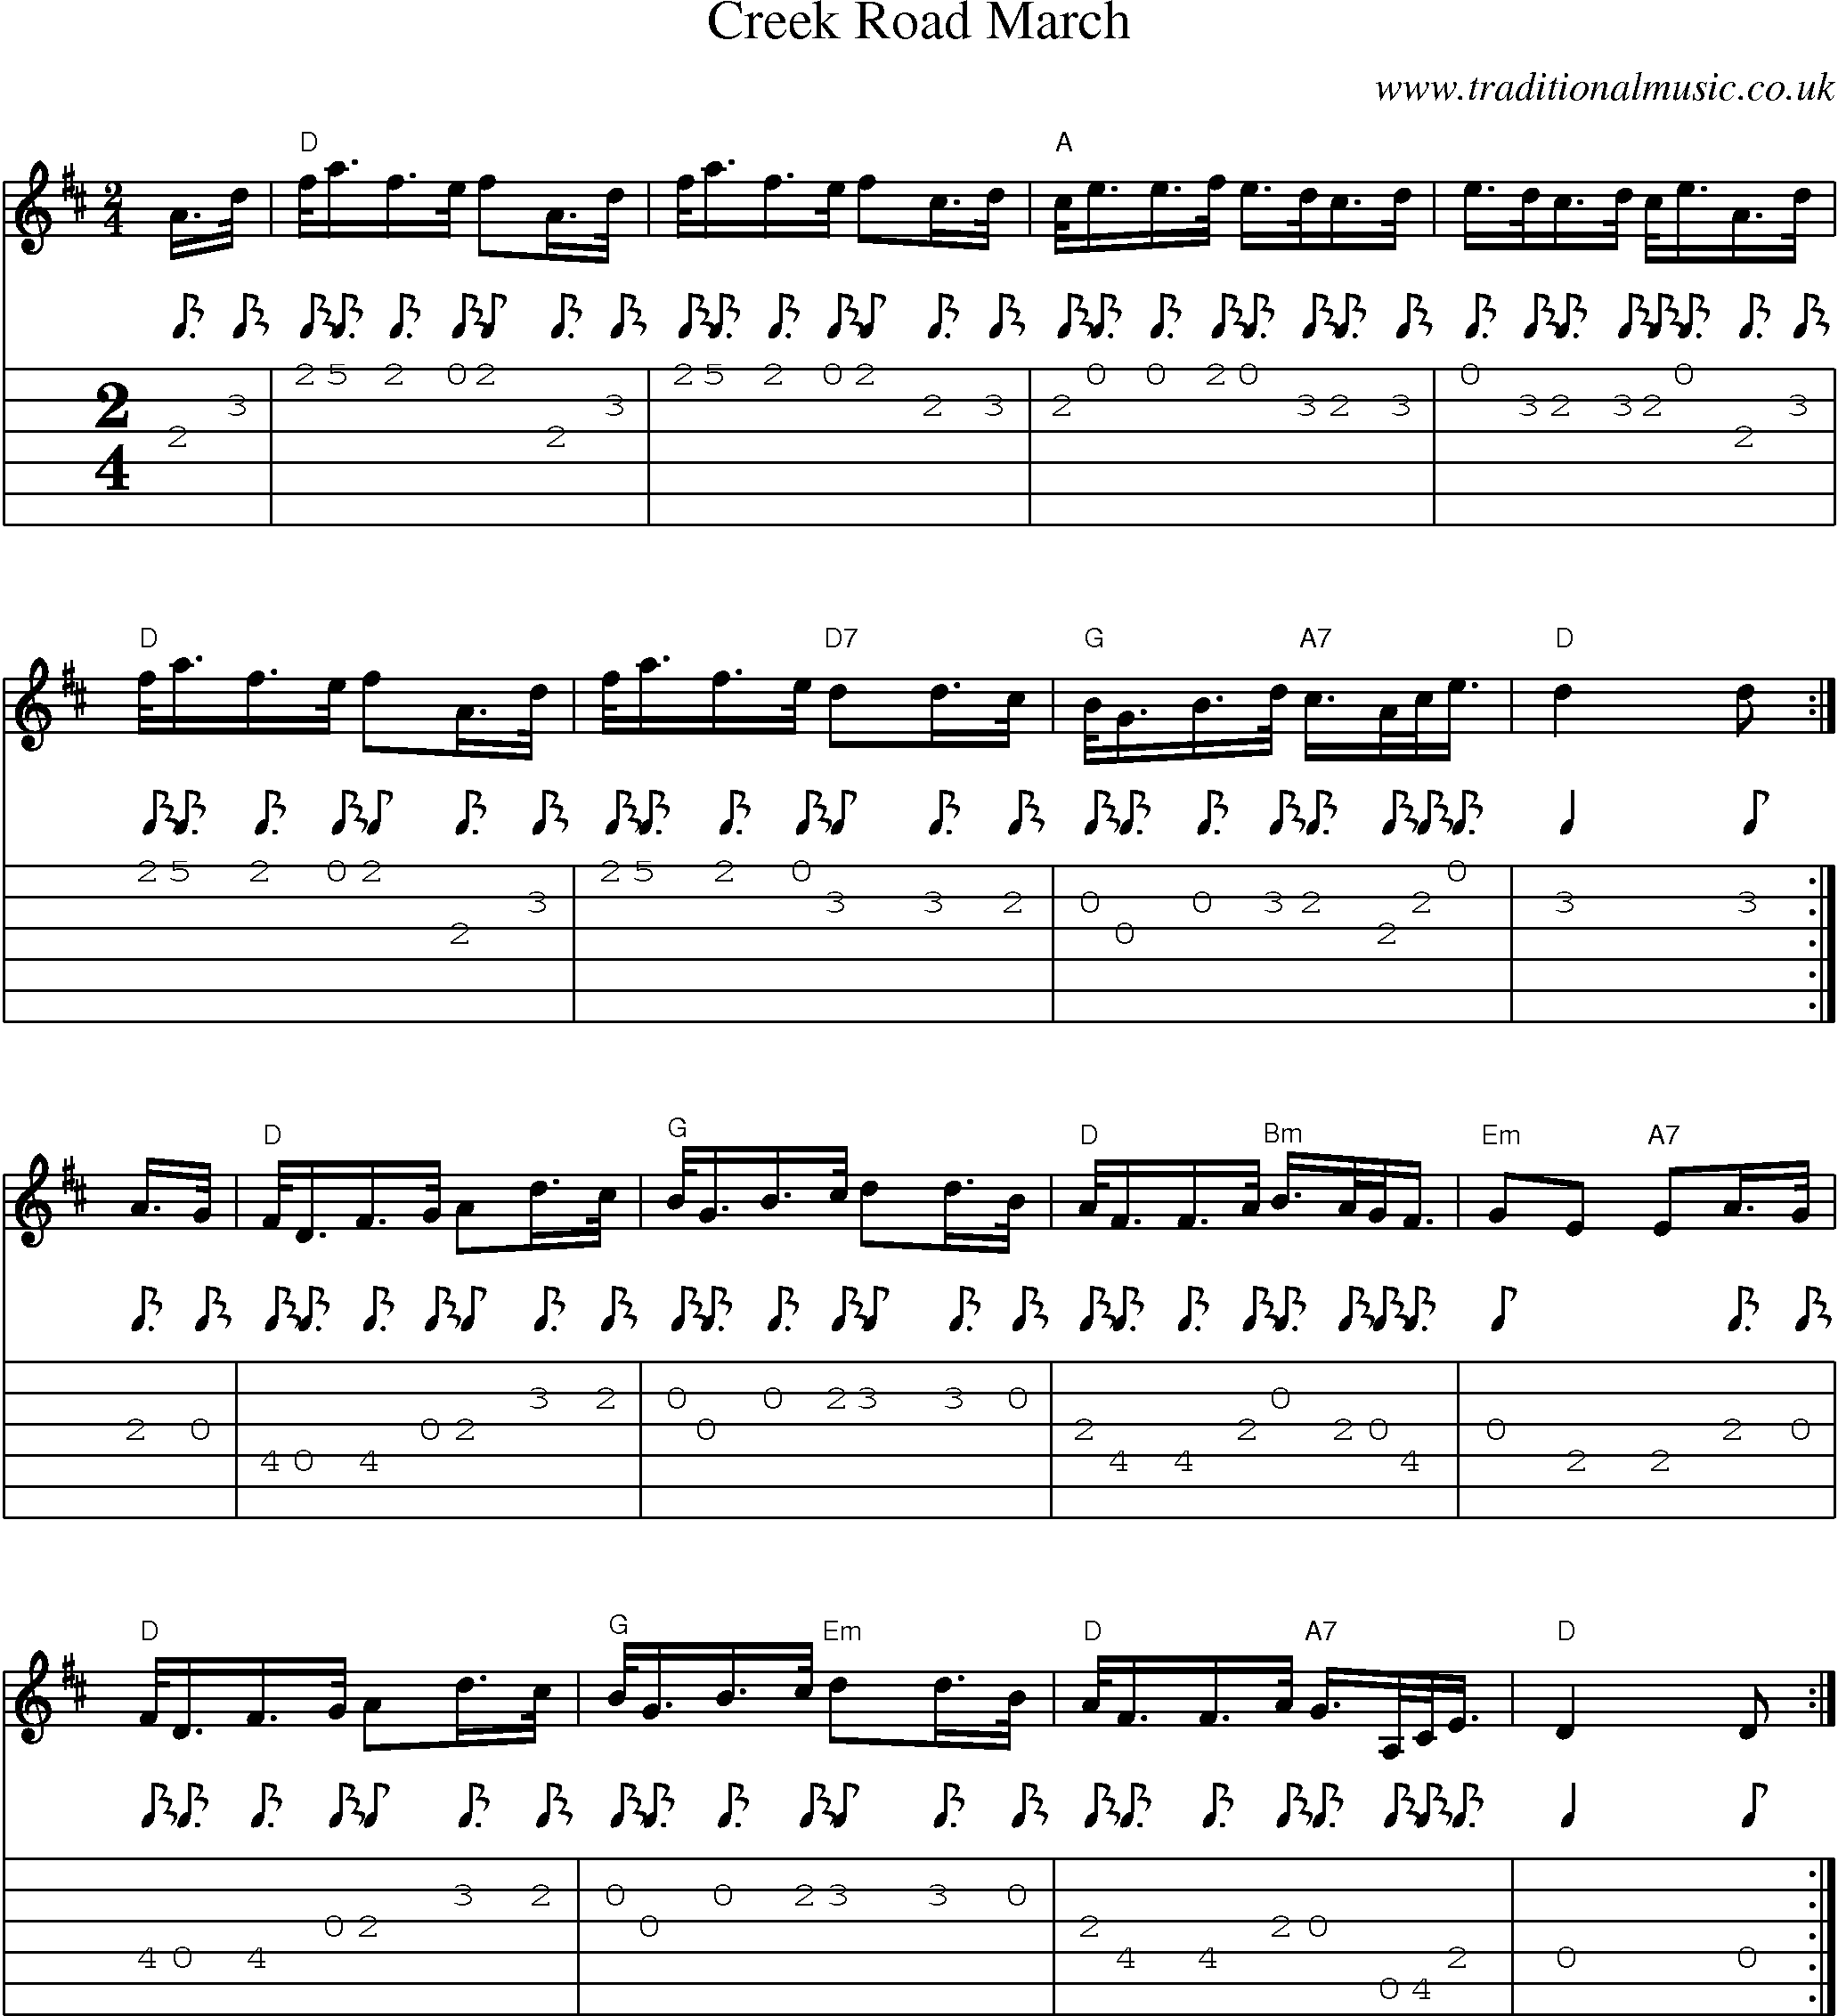 Music Score and Guitar Tabs for Creek Road March